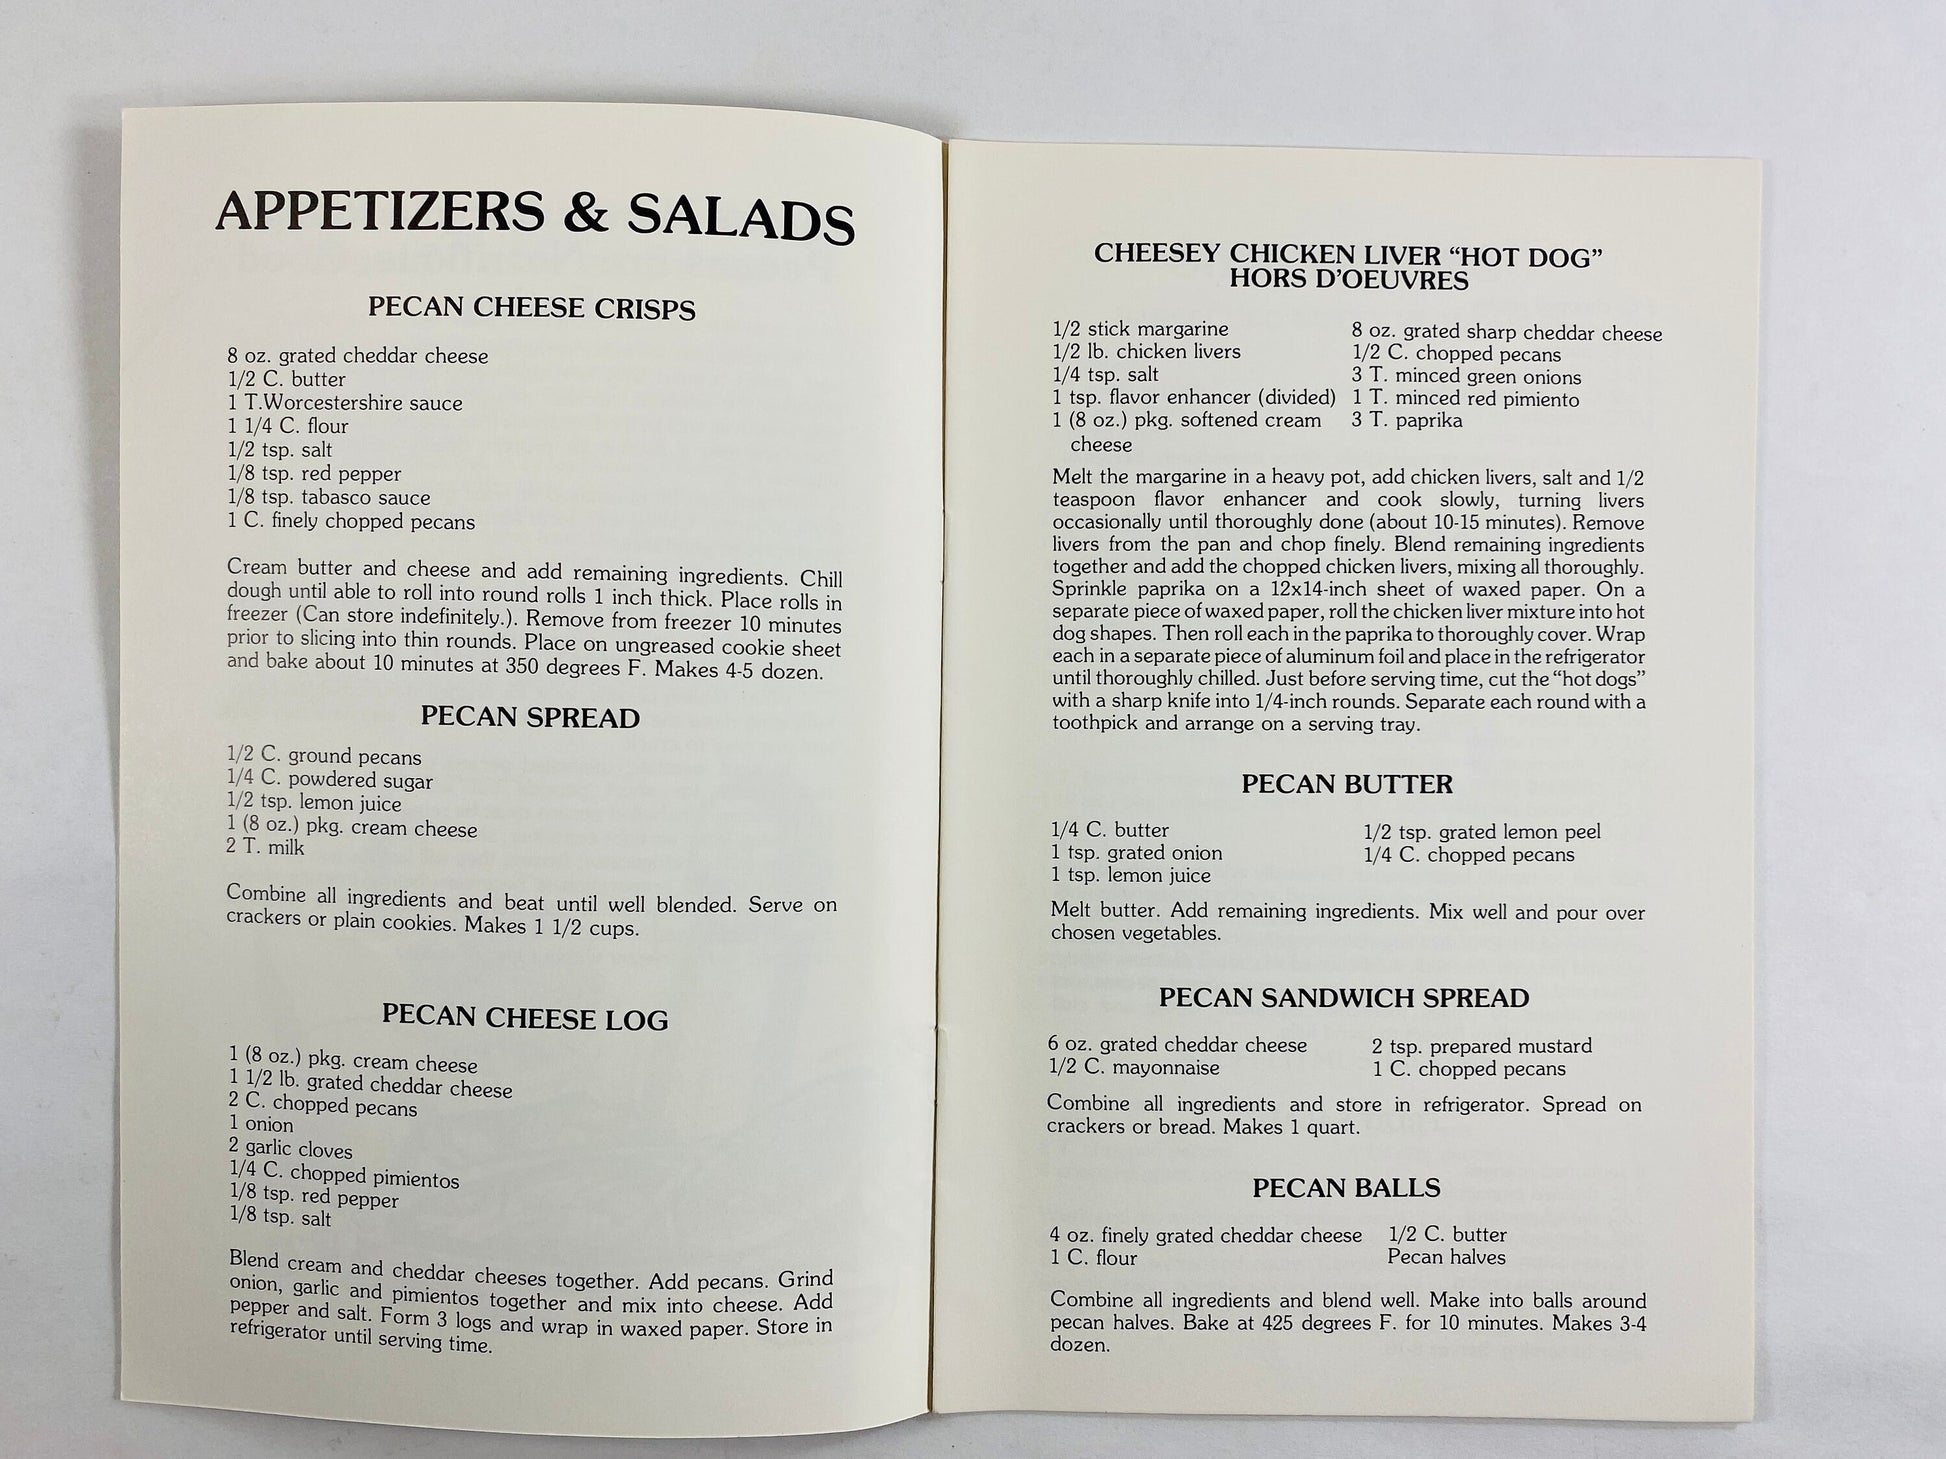 Get Cracking with Texas Pecans vintage cookbook booklet Hors D'oeuvres, pecan butter, Waldorf Salad, Tipsy Chicken